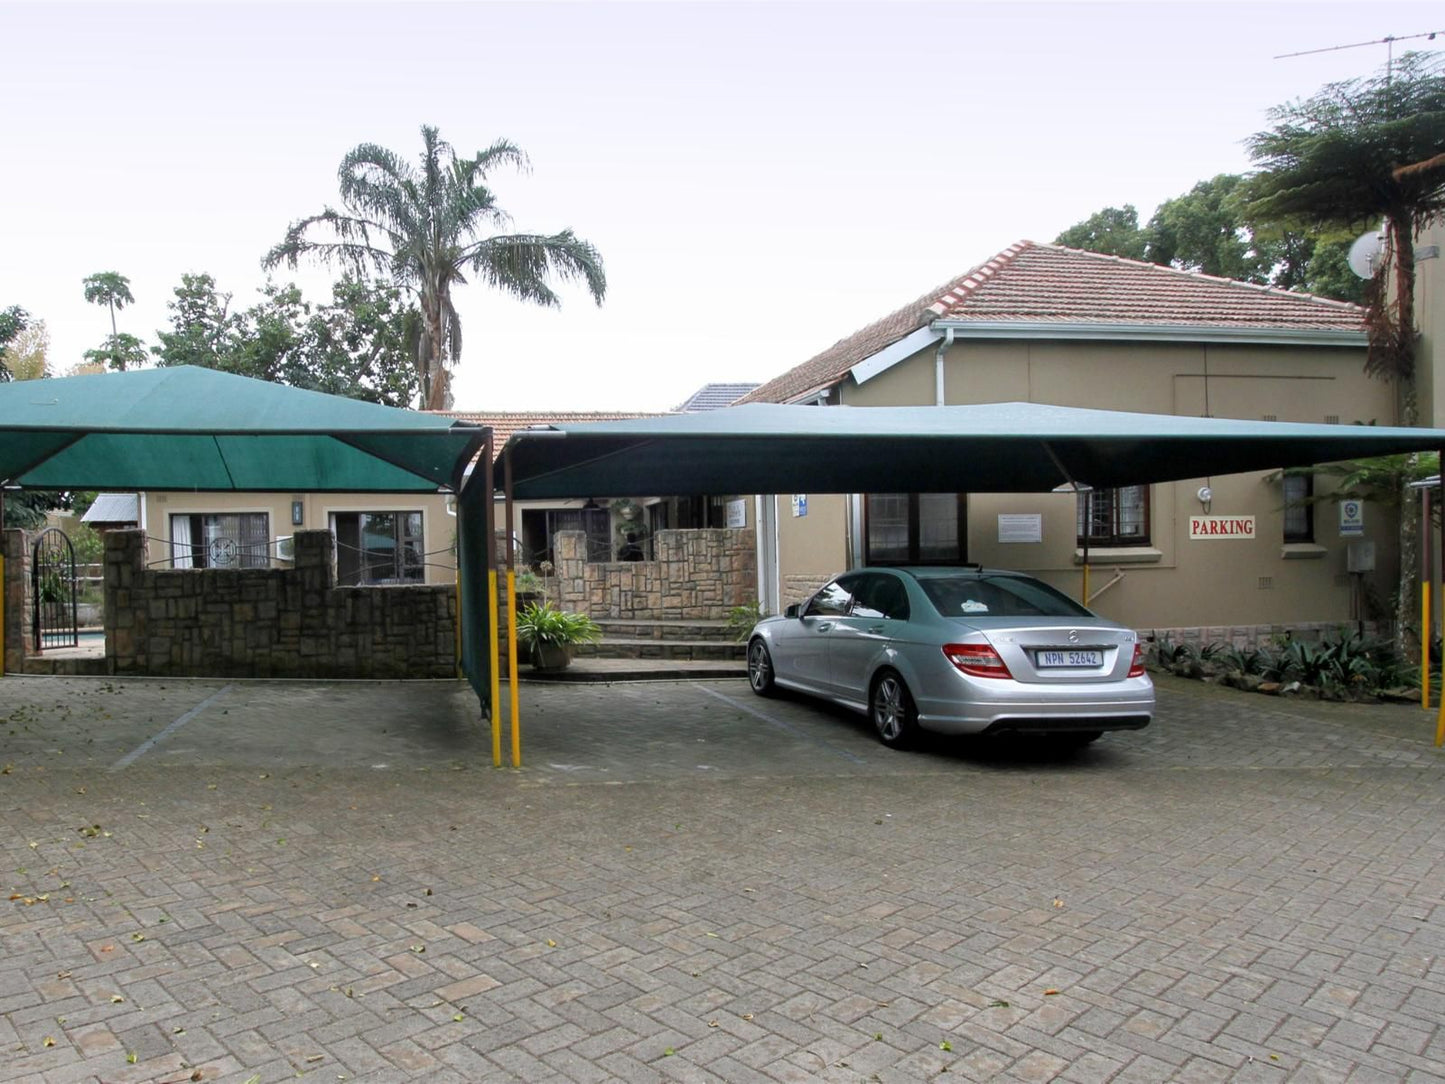 Liabela Bed And Breakfast Pinetown Durban Kwazulu Natal South Africa Car, Vehicle, House, Building, Architecture, Window